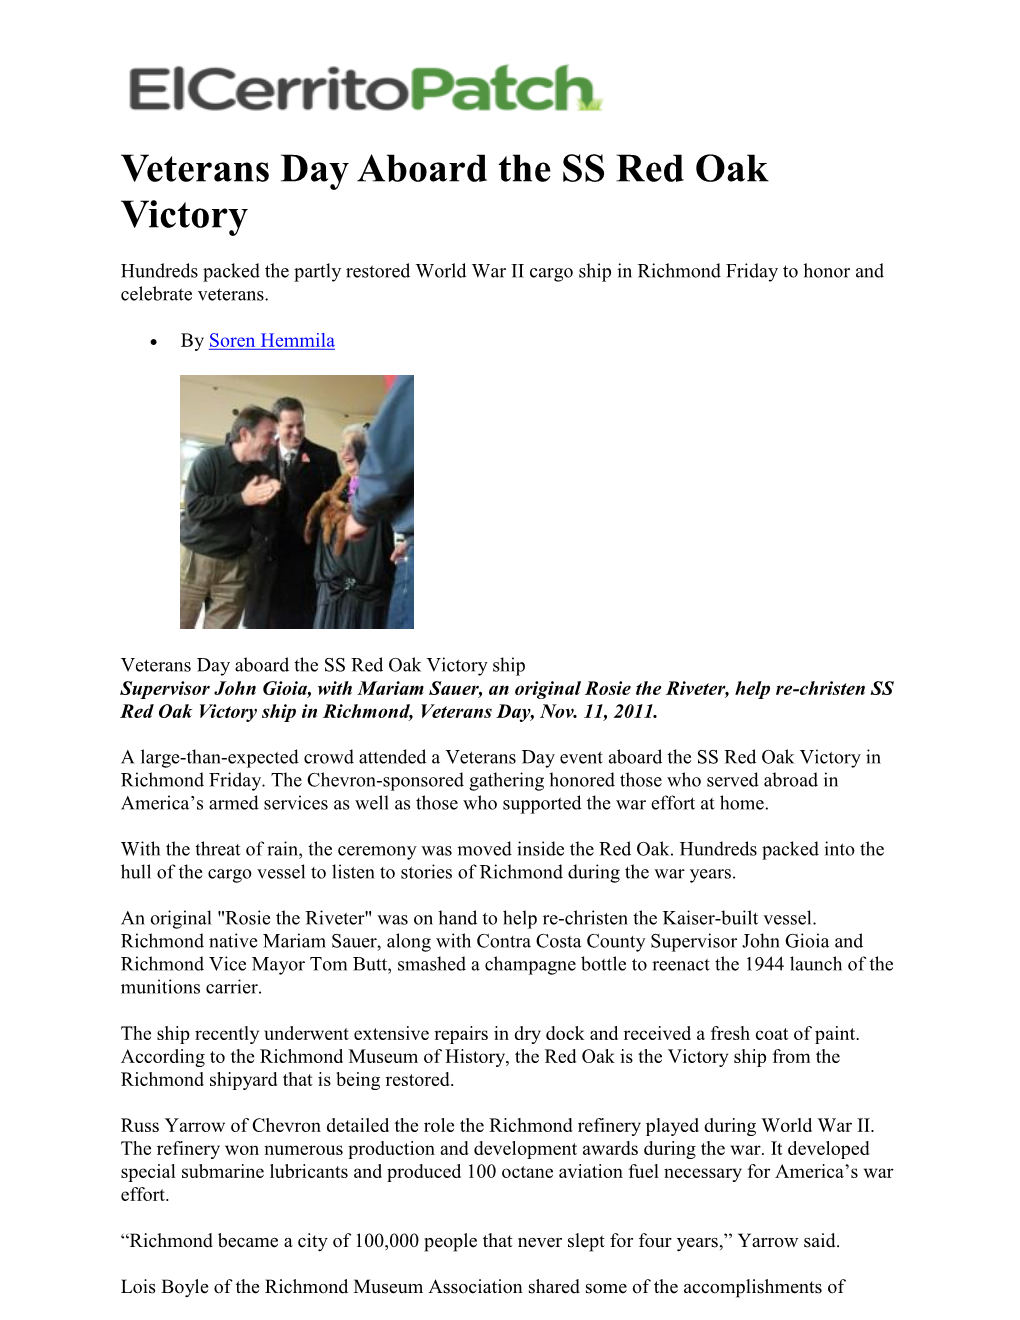 Veterans Day Aboard the SS Red Oak Victory